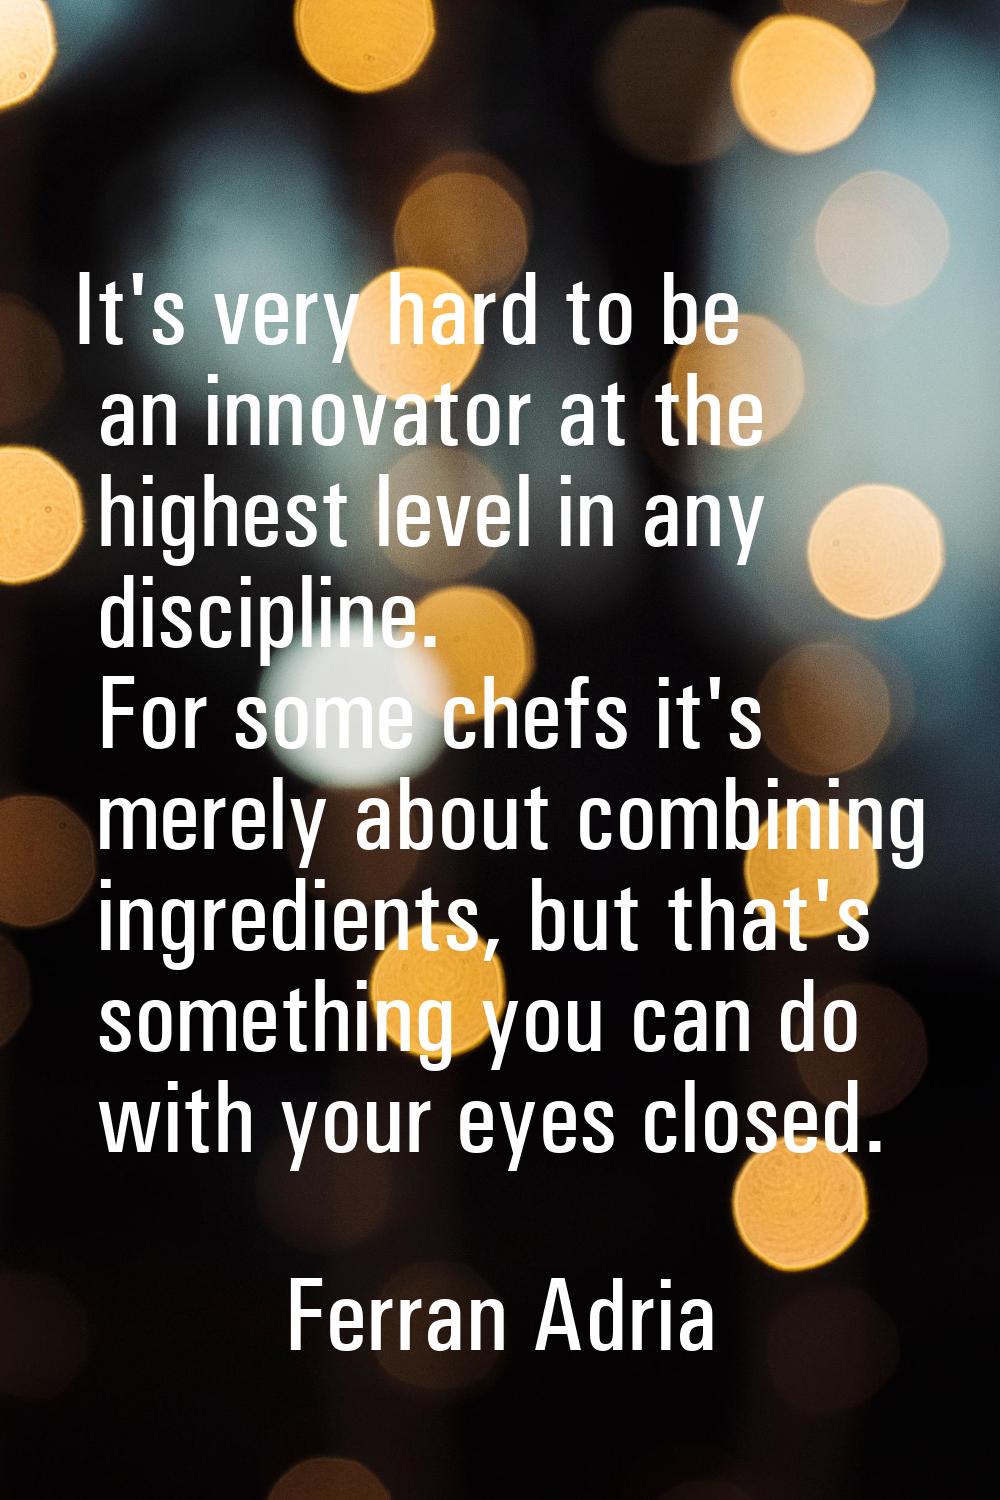 It's very hard to be an innovator at the highest level in any discipline. For some chefs it's merel